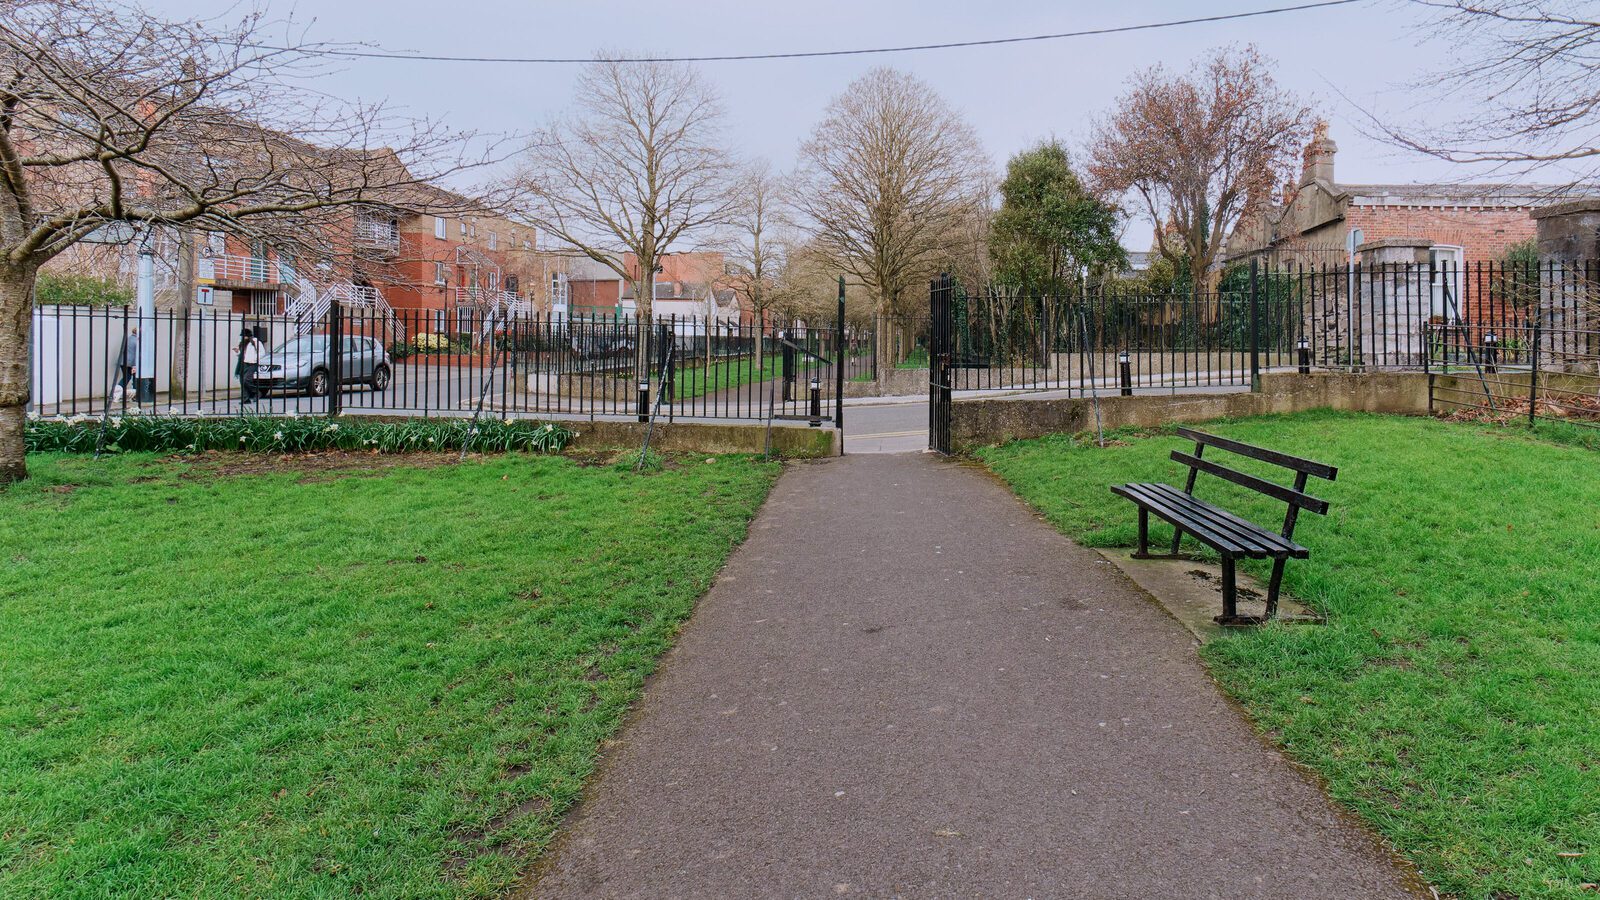 THE ROYAL CANAL WALK LINEAR PARK [FEATURING A 1916 EASTER RISING MEMORIAL]-229542-1